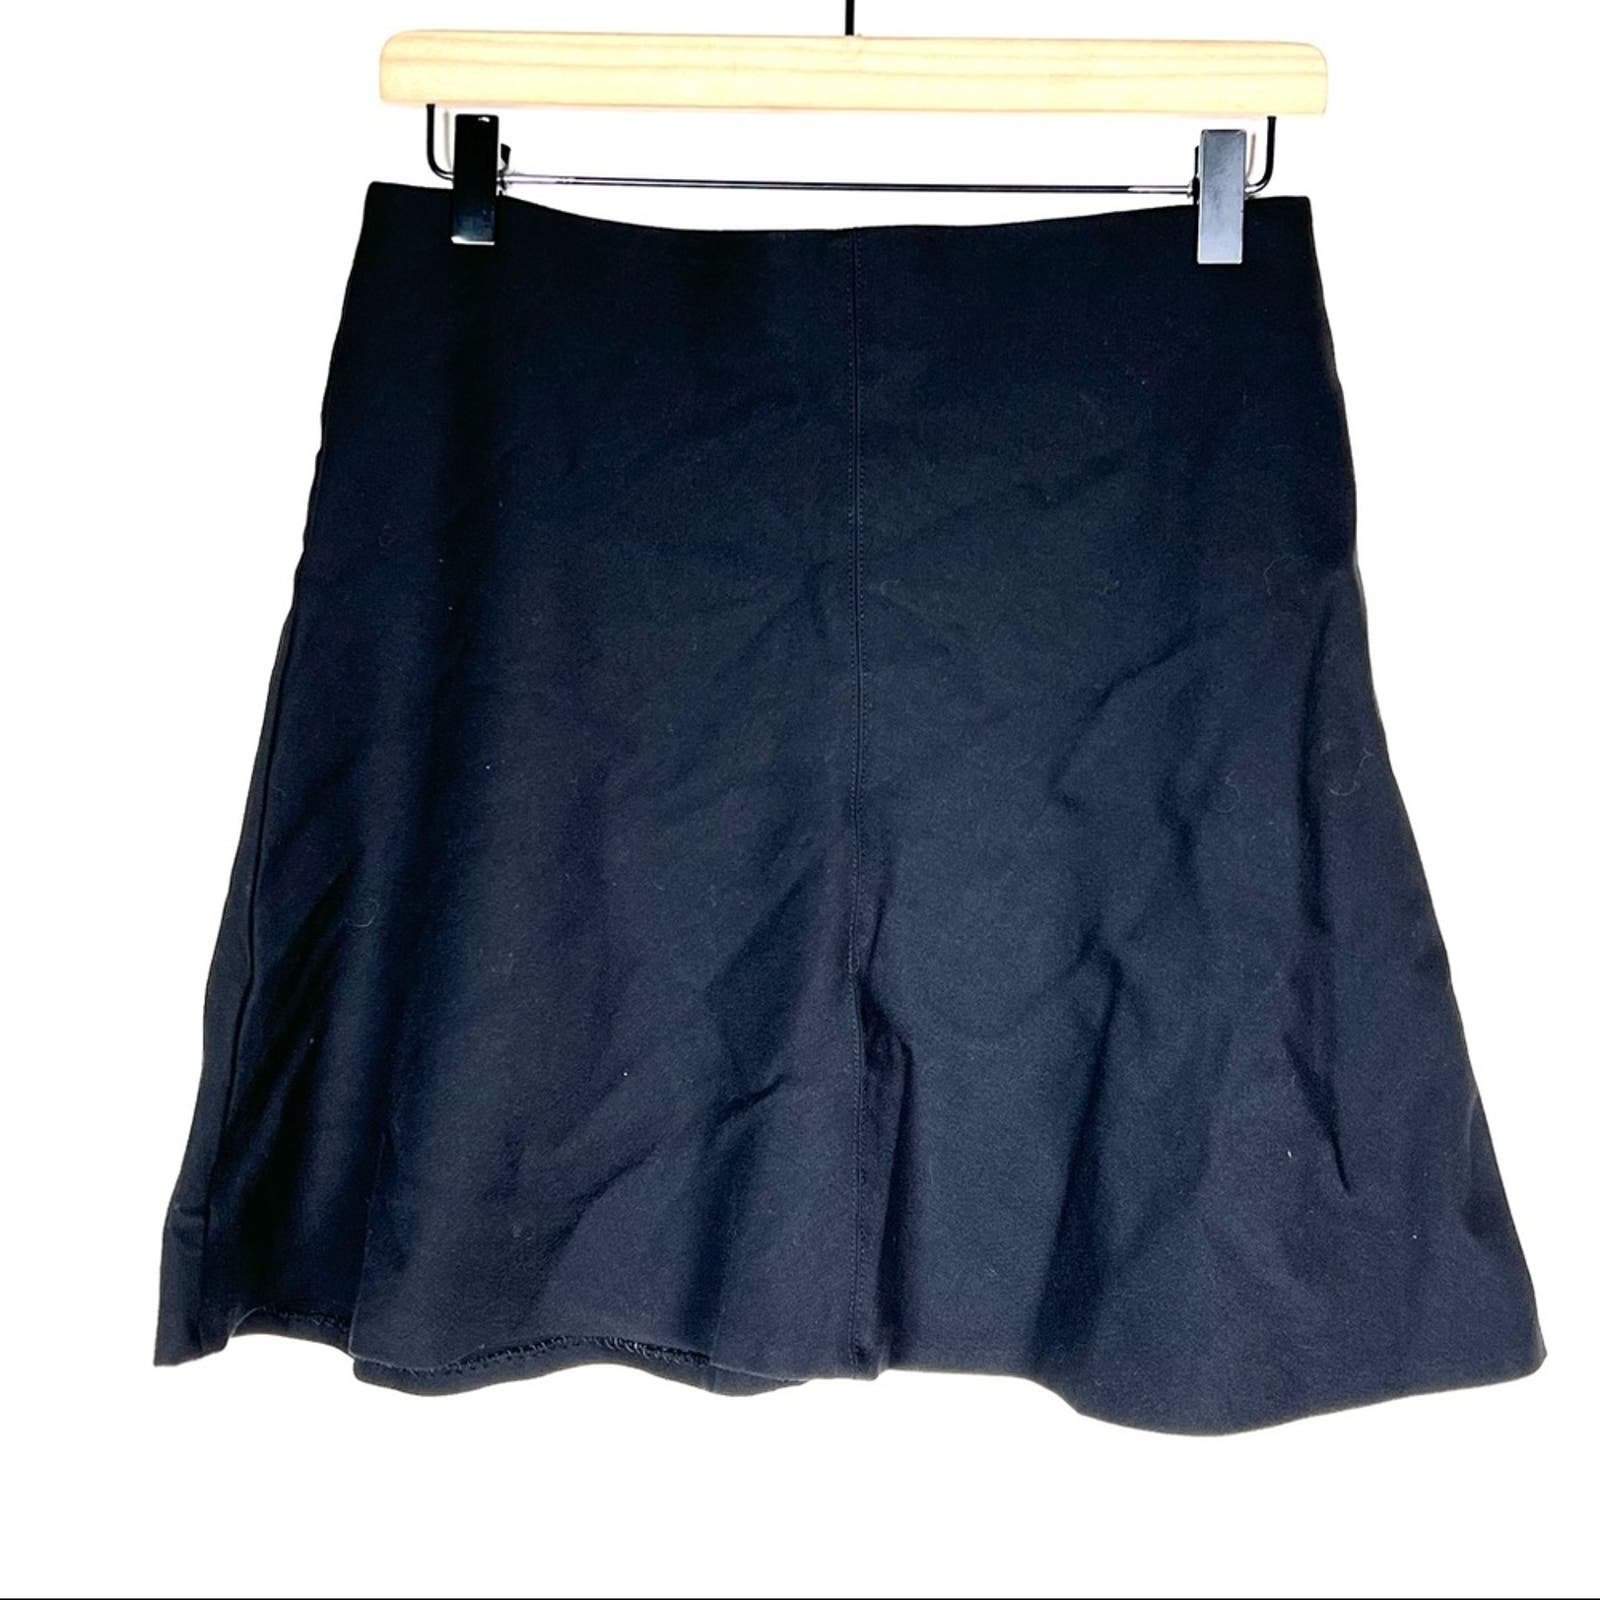 reasonable price Loft black elastic waist casual A-line skirt size small S b34 fTW4lKUij US Outlet